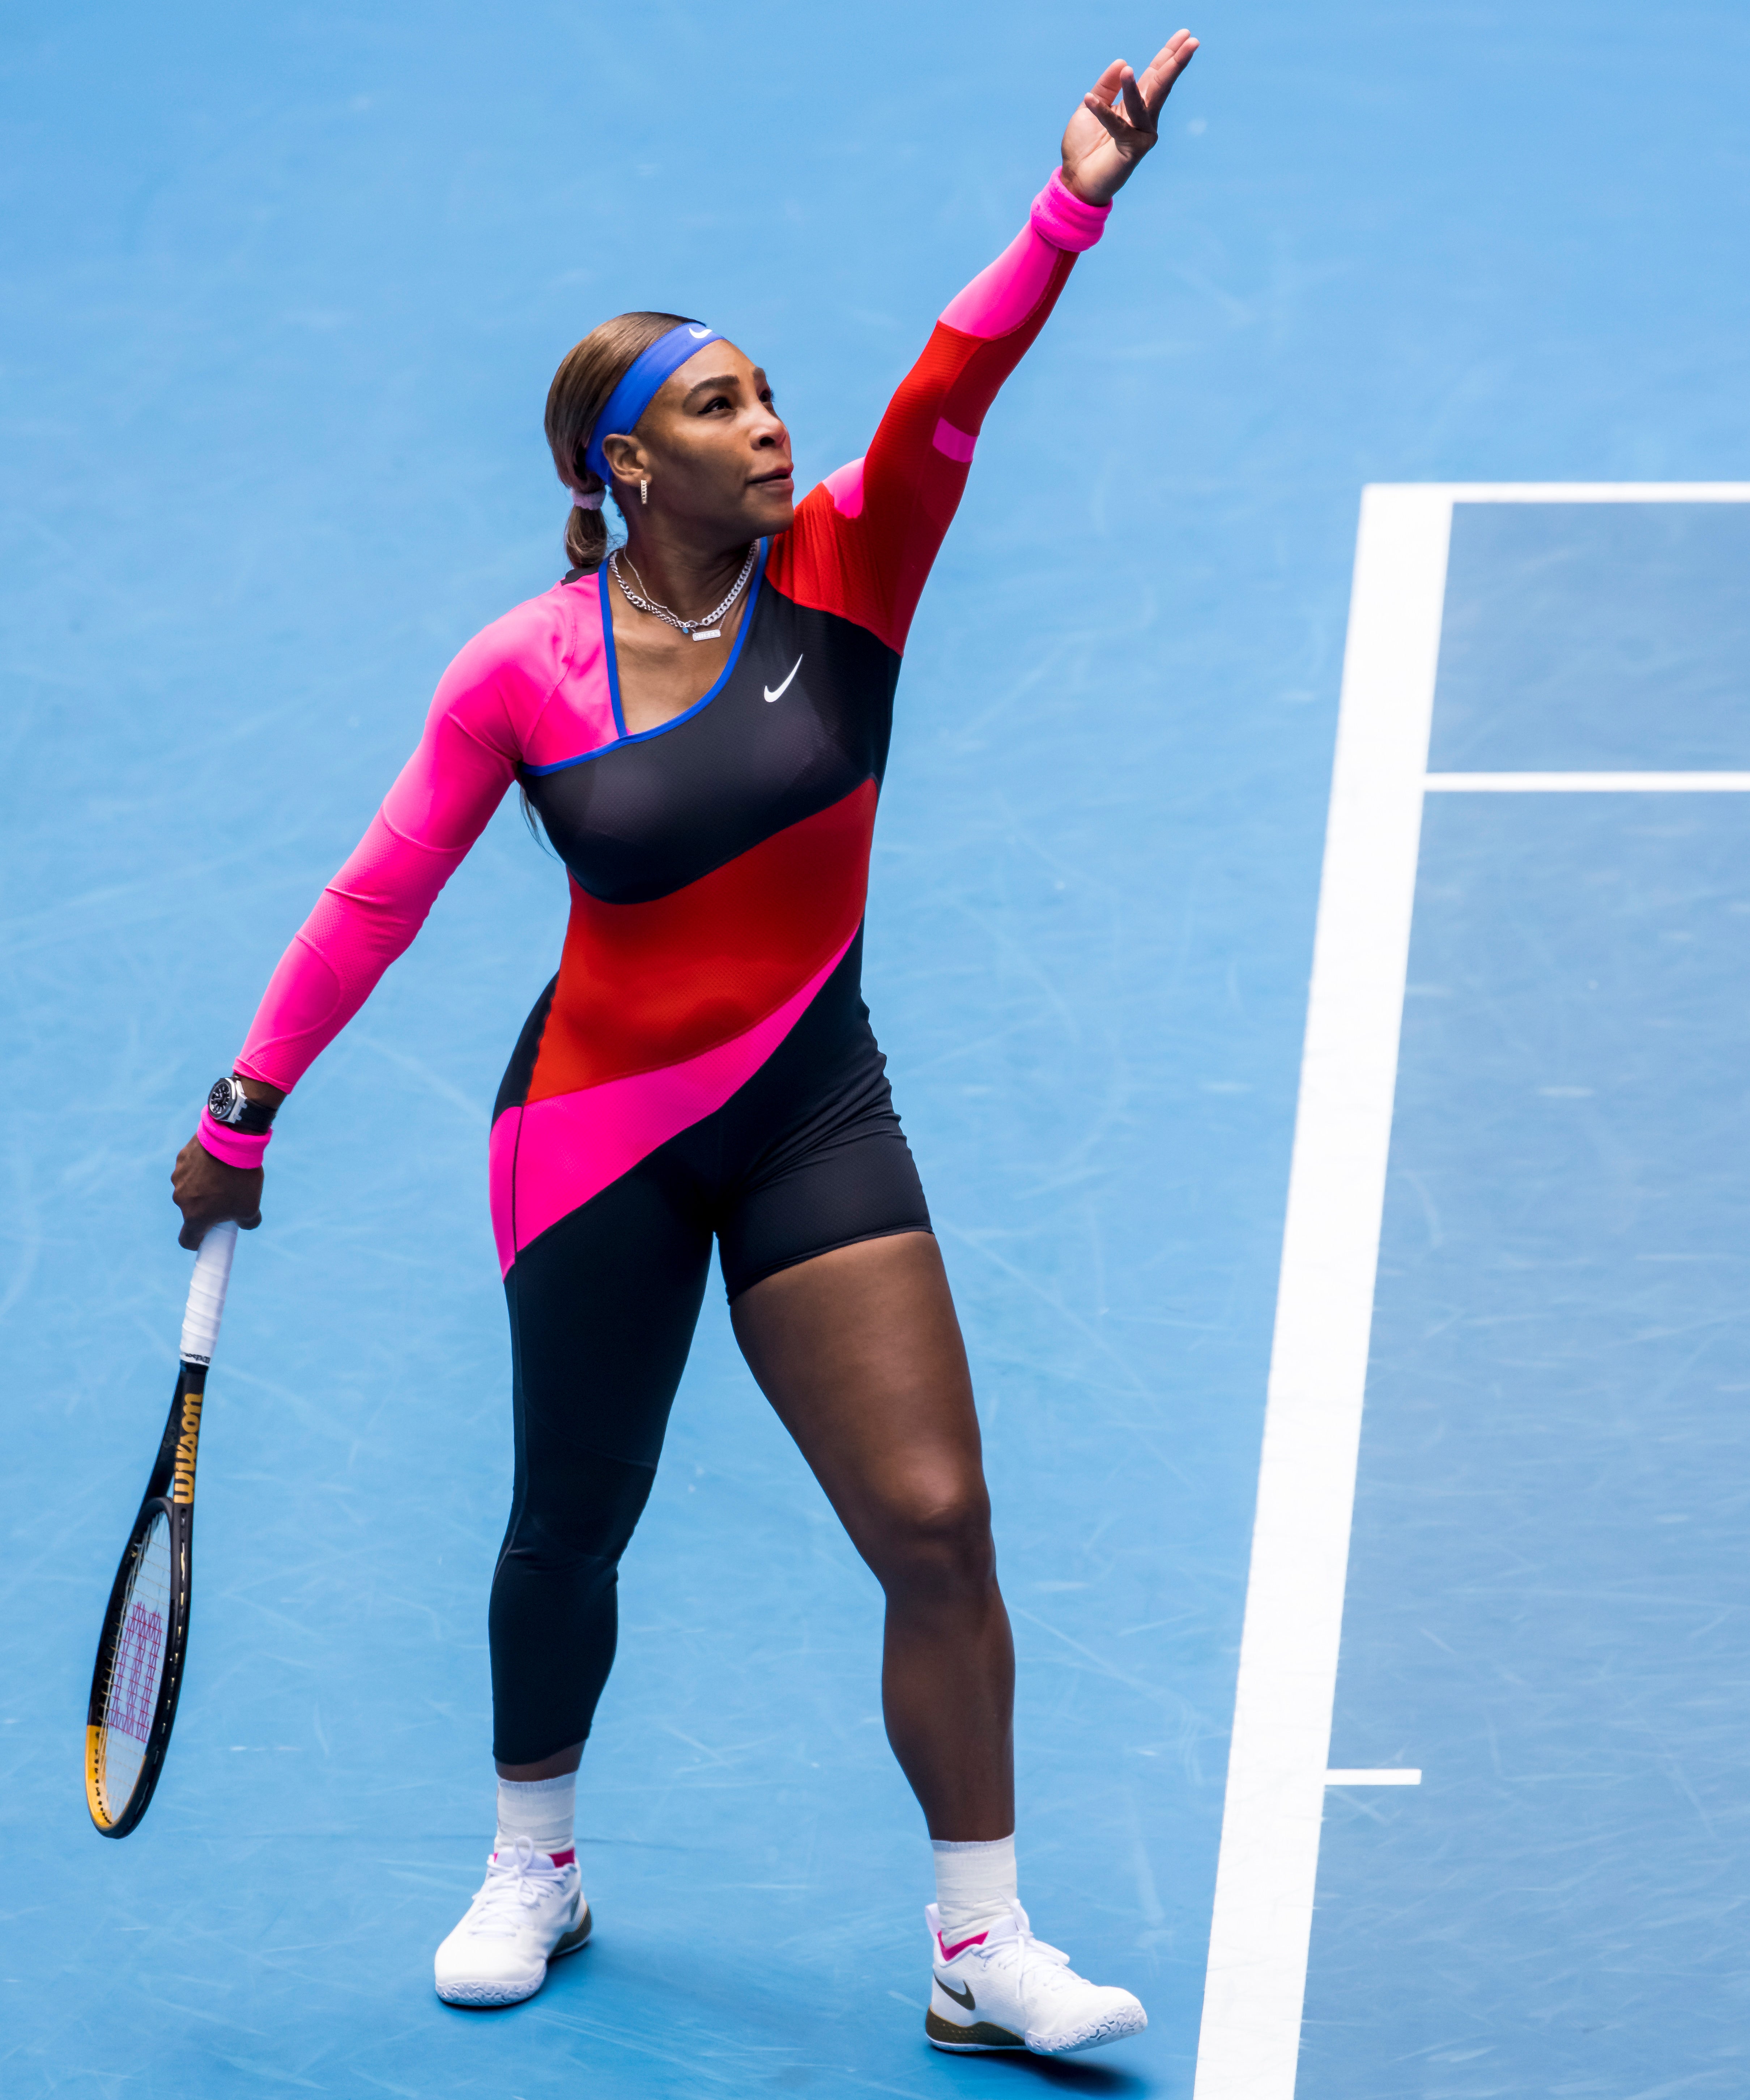 Serena Williams’ Asymmetric Catsuit At The Australian Open Was Inspired By Flo-Jo